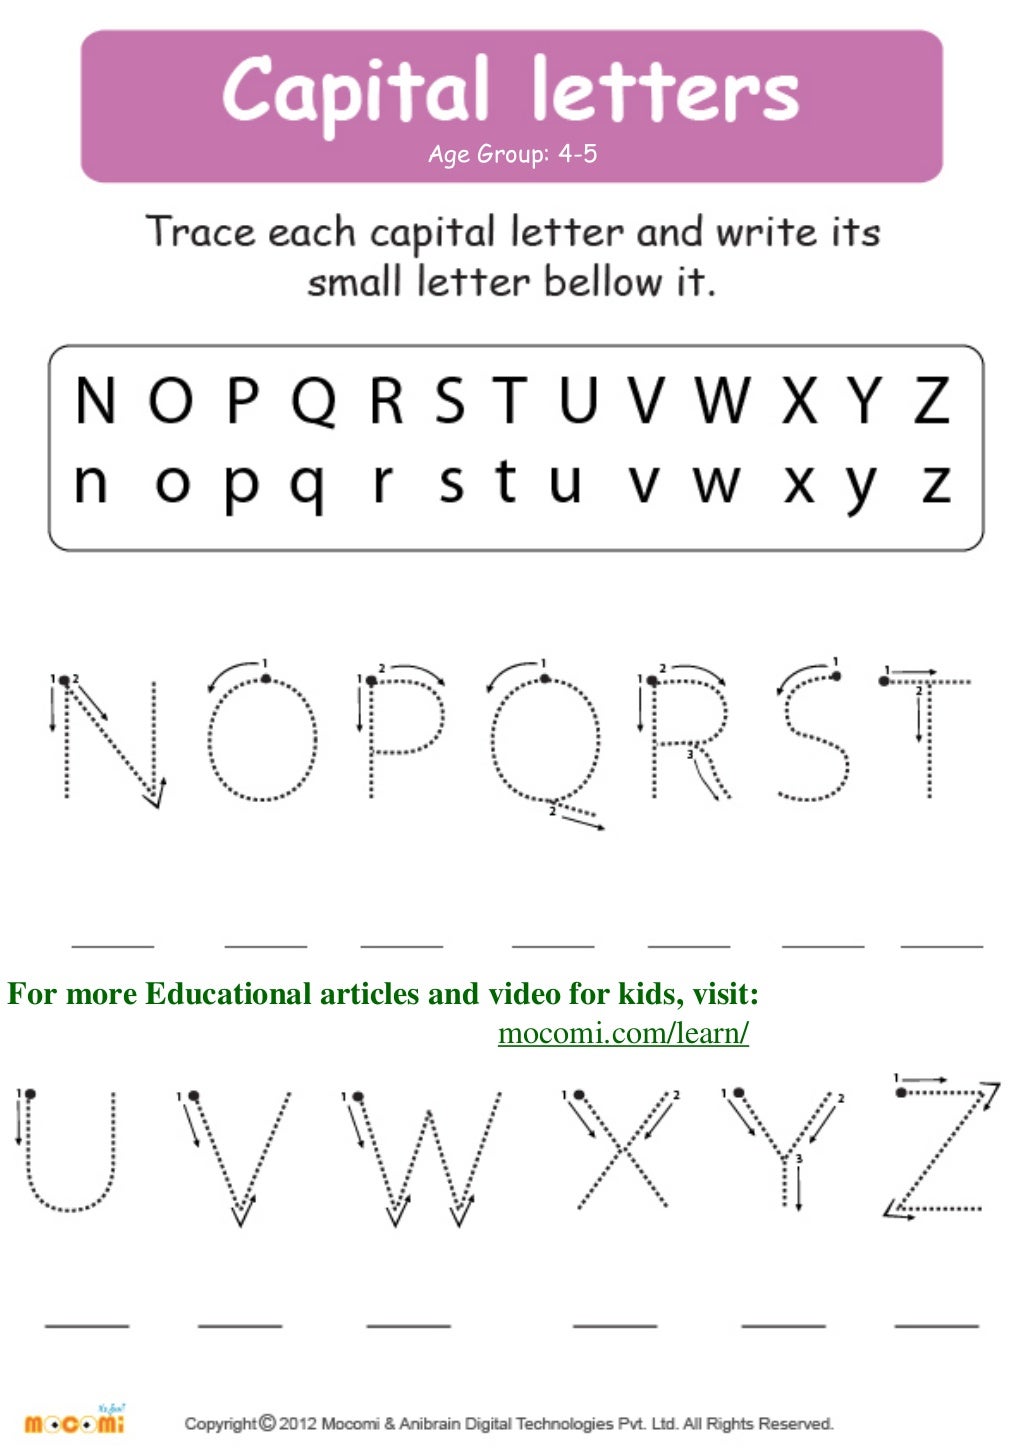 capital-letters-english-worksheets-for-kids-mocomi